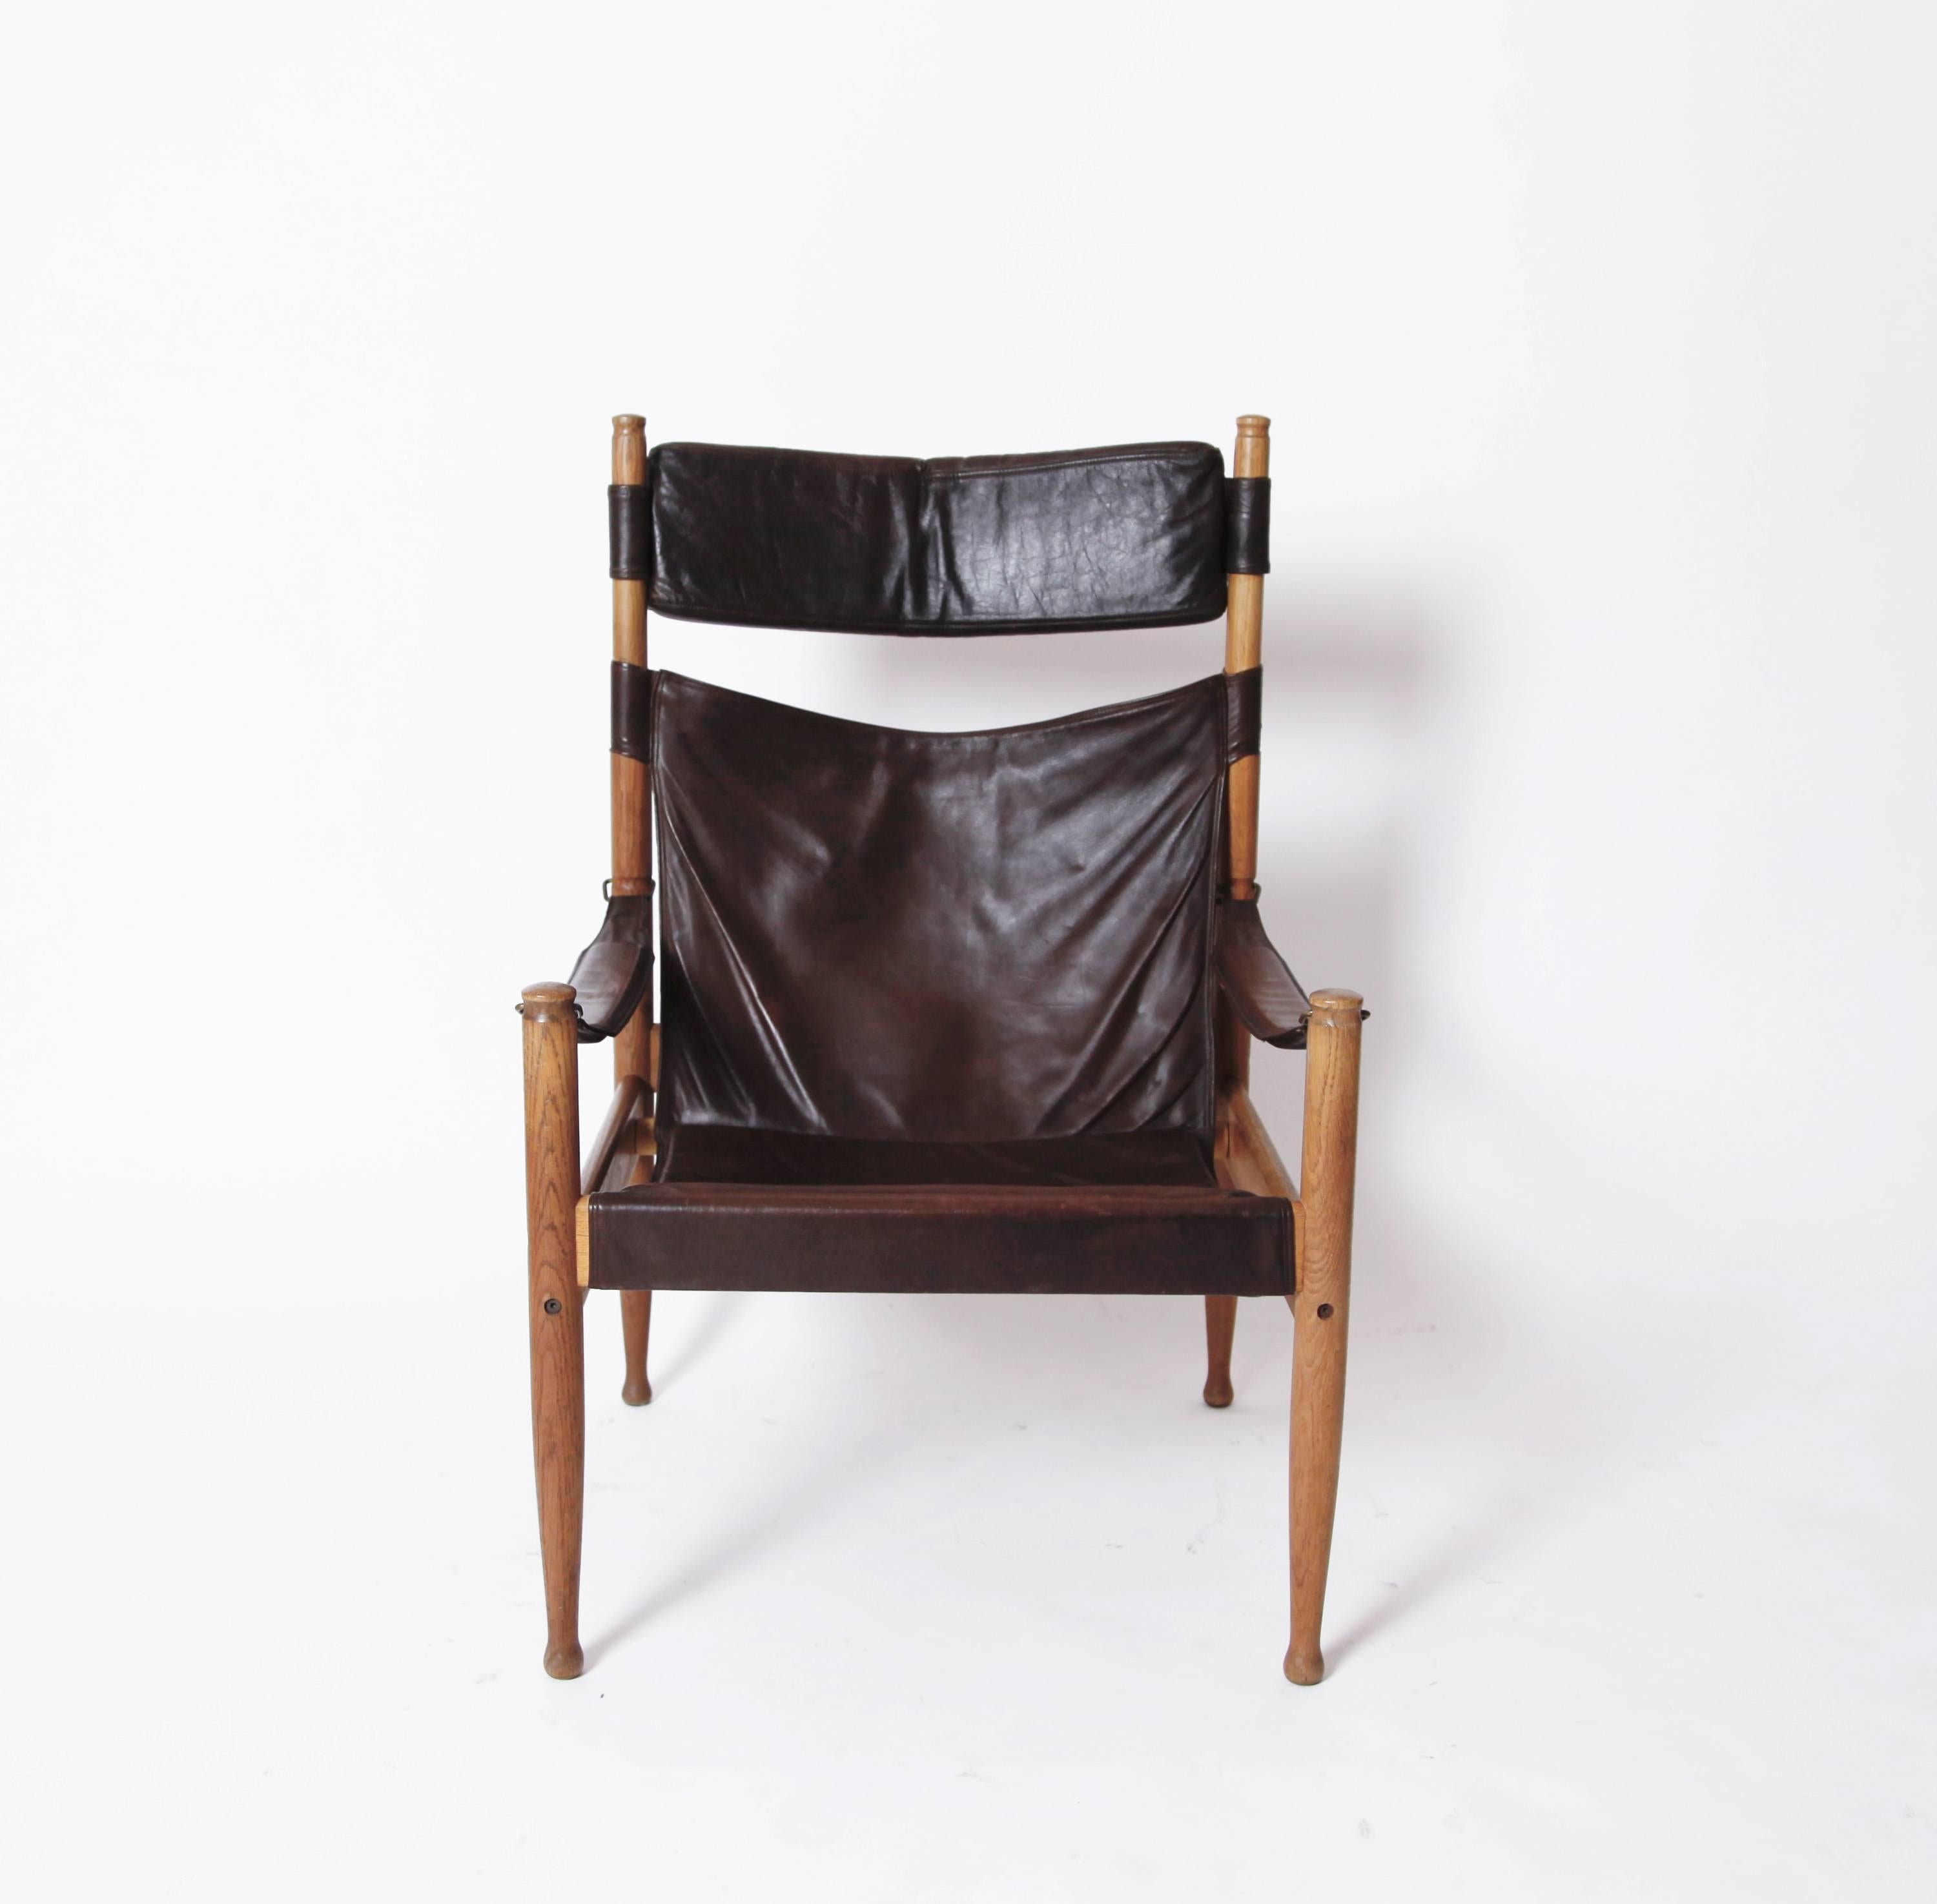 Erik Worts' high back iteration of the classic safari chair is quite beautiful. The oak legs are slender and curvaceous, there is a cushioned headrest and loose seat cushion, and the dark burgundy leather overall is soft and wonderfully aged.